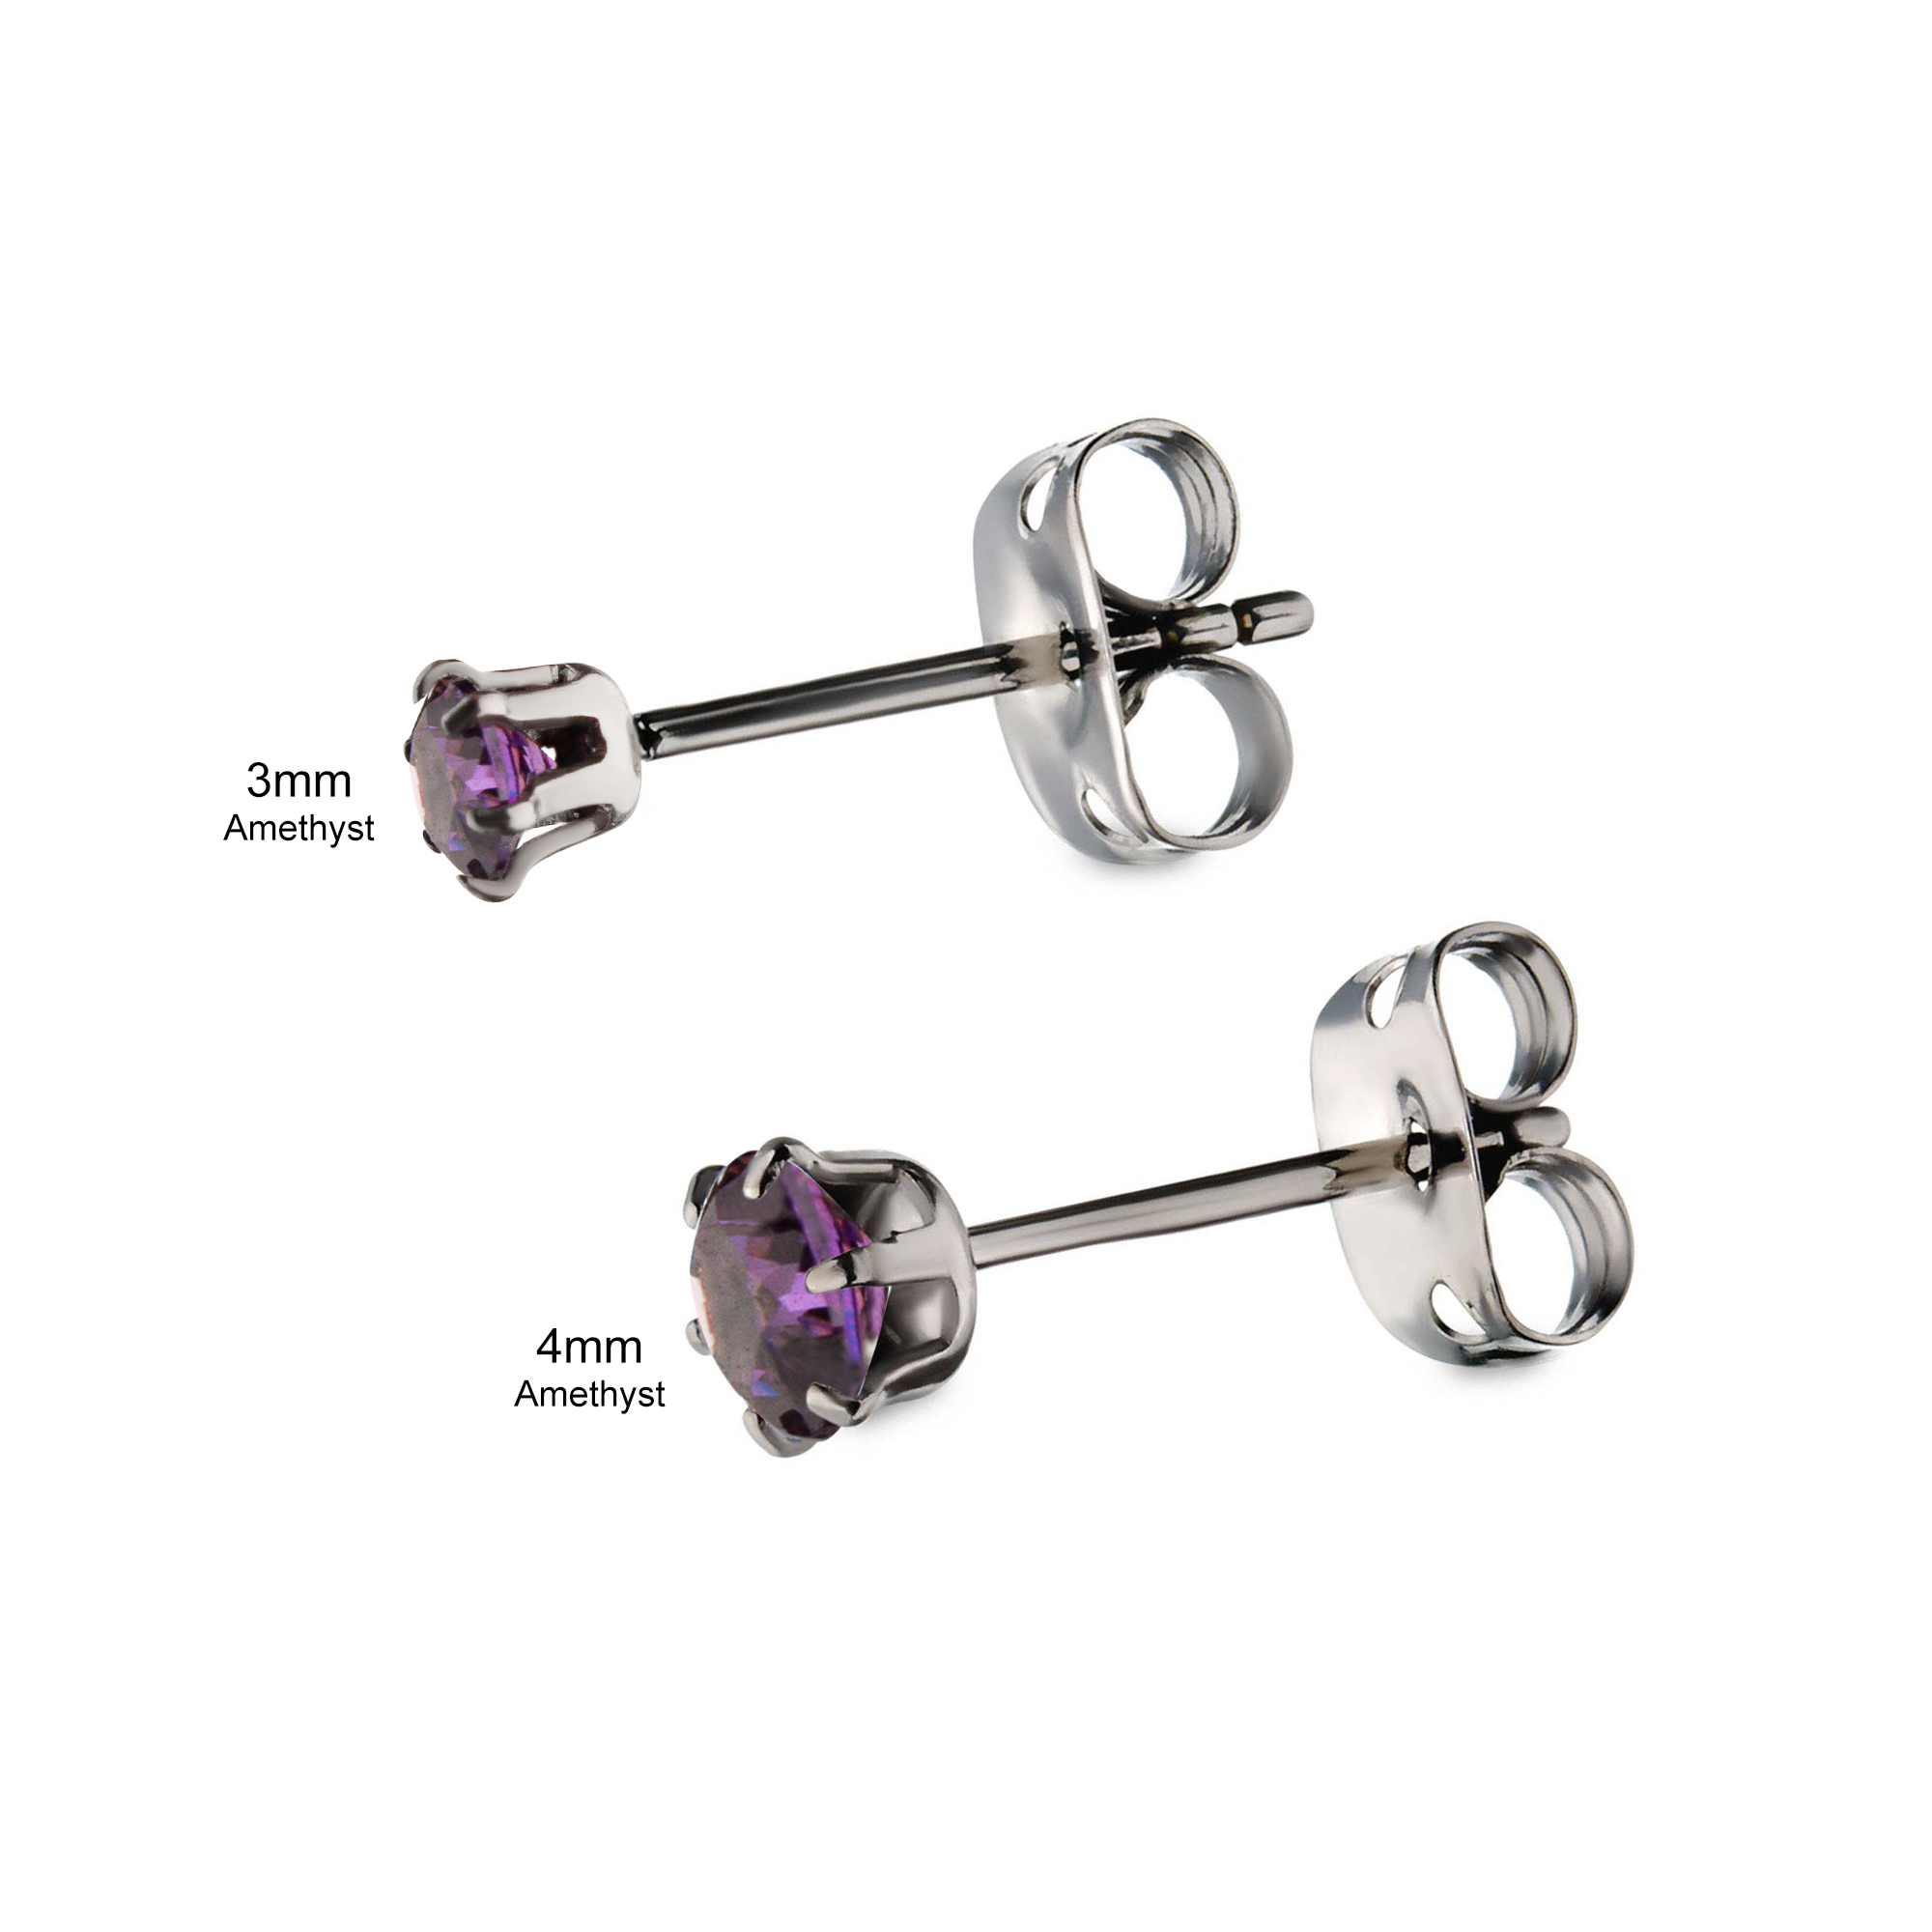 20g Titanium Post and Butterfly Back with Prong Set CZ Stud Earrings Image 5 Ken Walker Jewelers Gig Harbor, WA